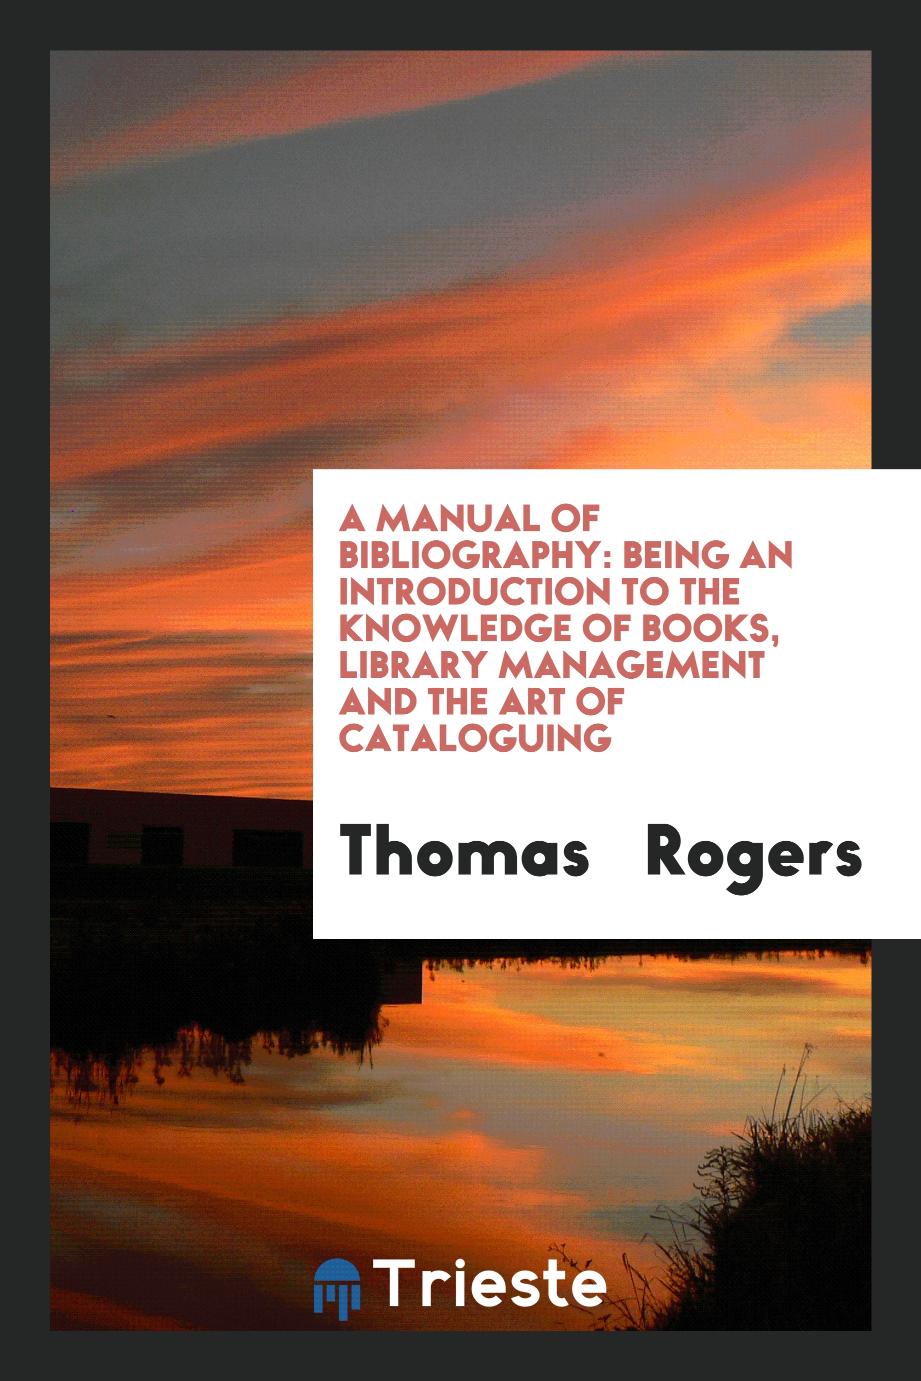 A Manual of Bibliography: Being an Introduction to the Knowledge of Books, Library Management and the Art of Cataloguing